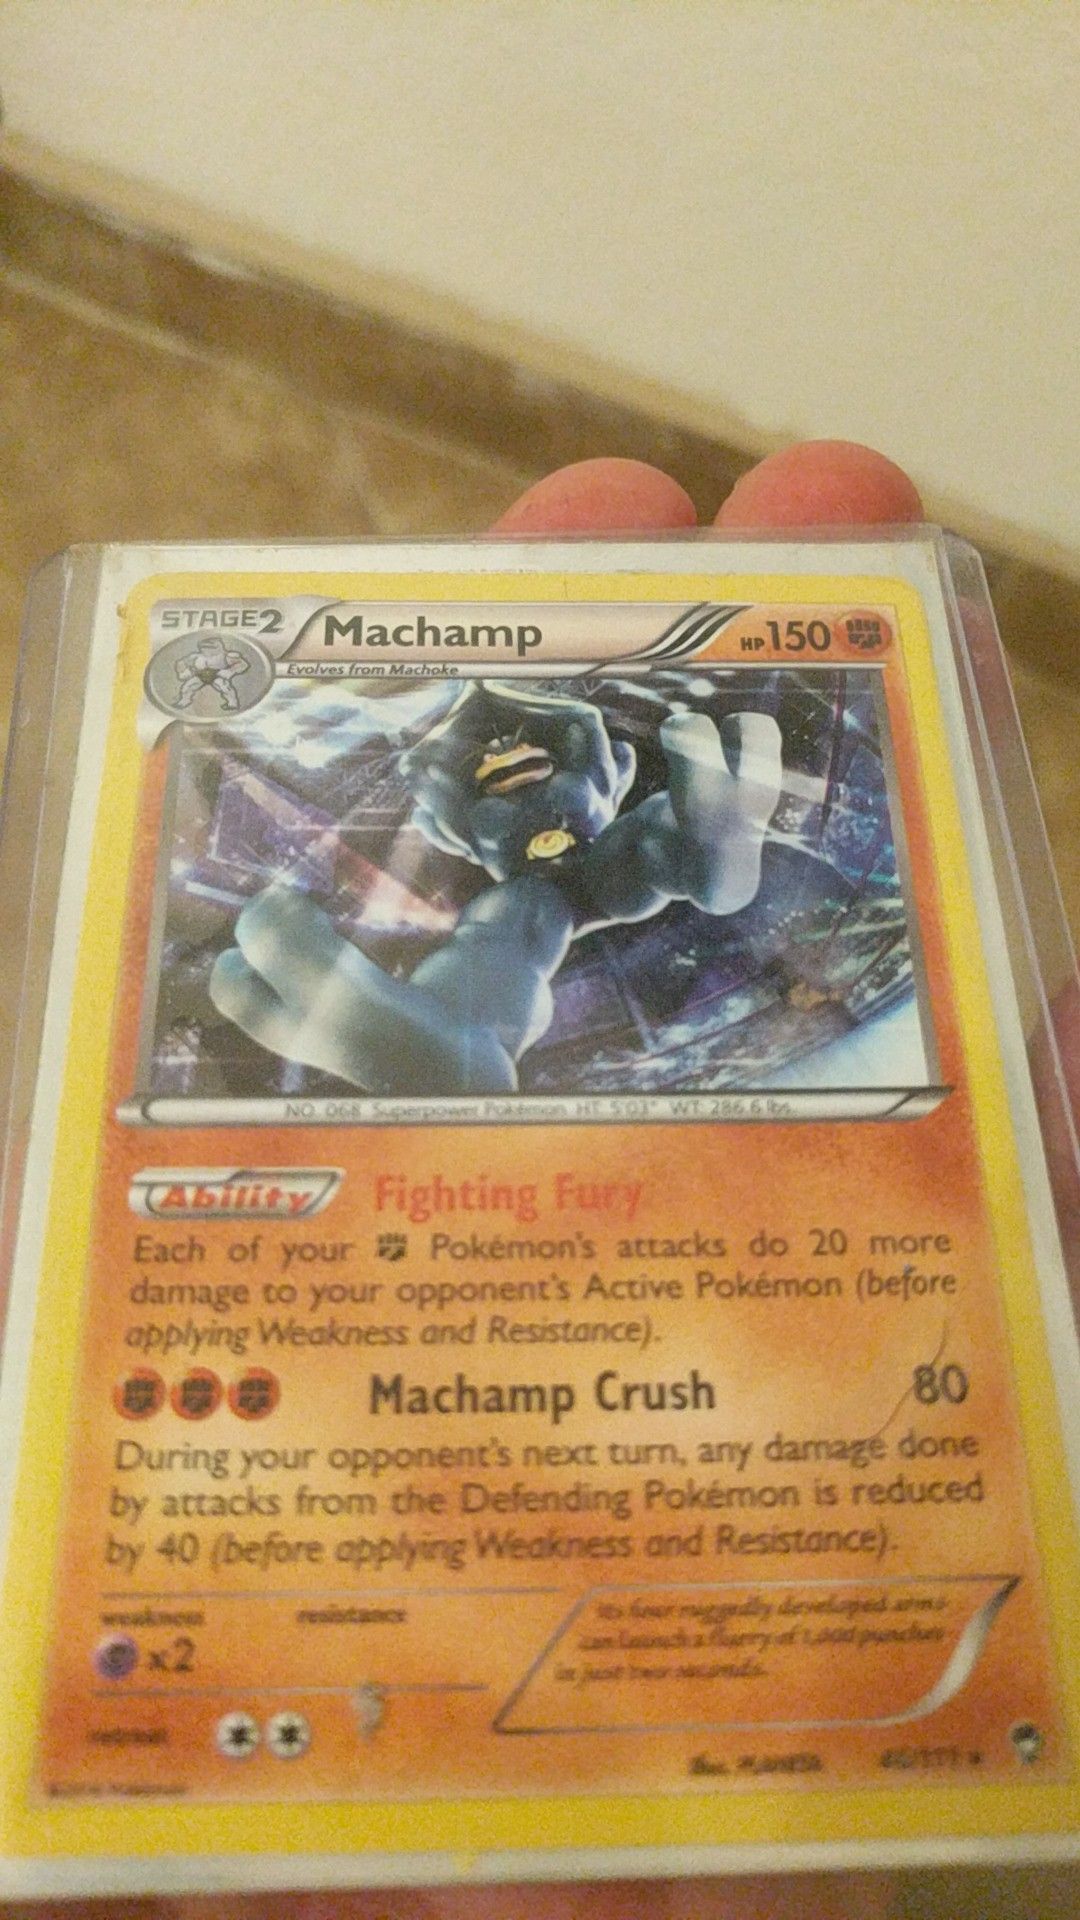 Mint condition Machamp Stage 2 Holographic Pokemon card